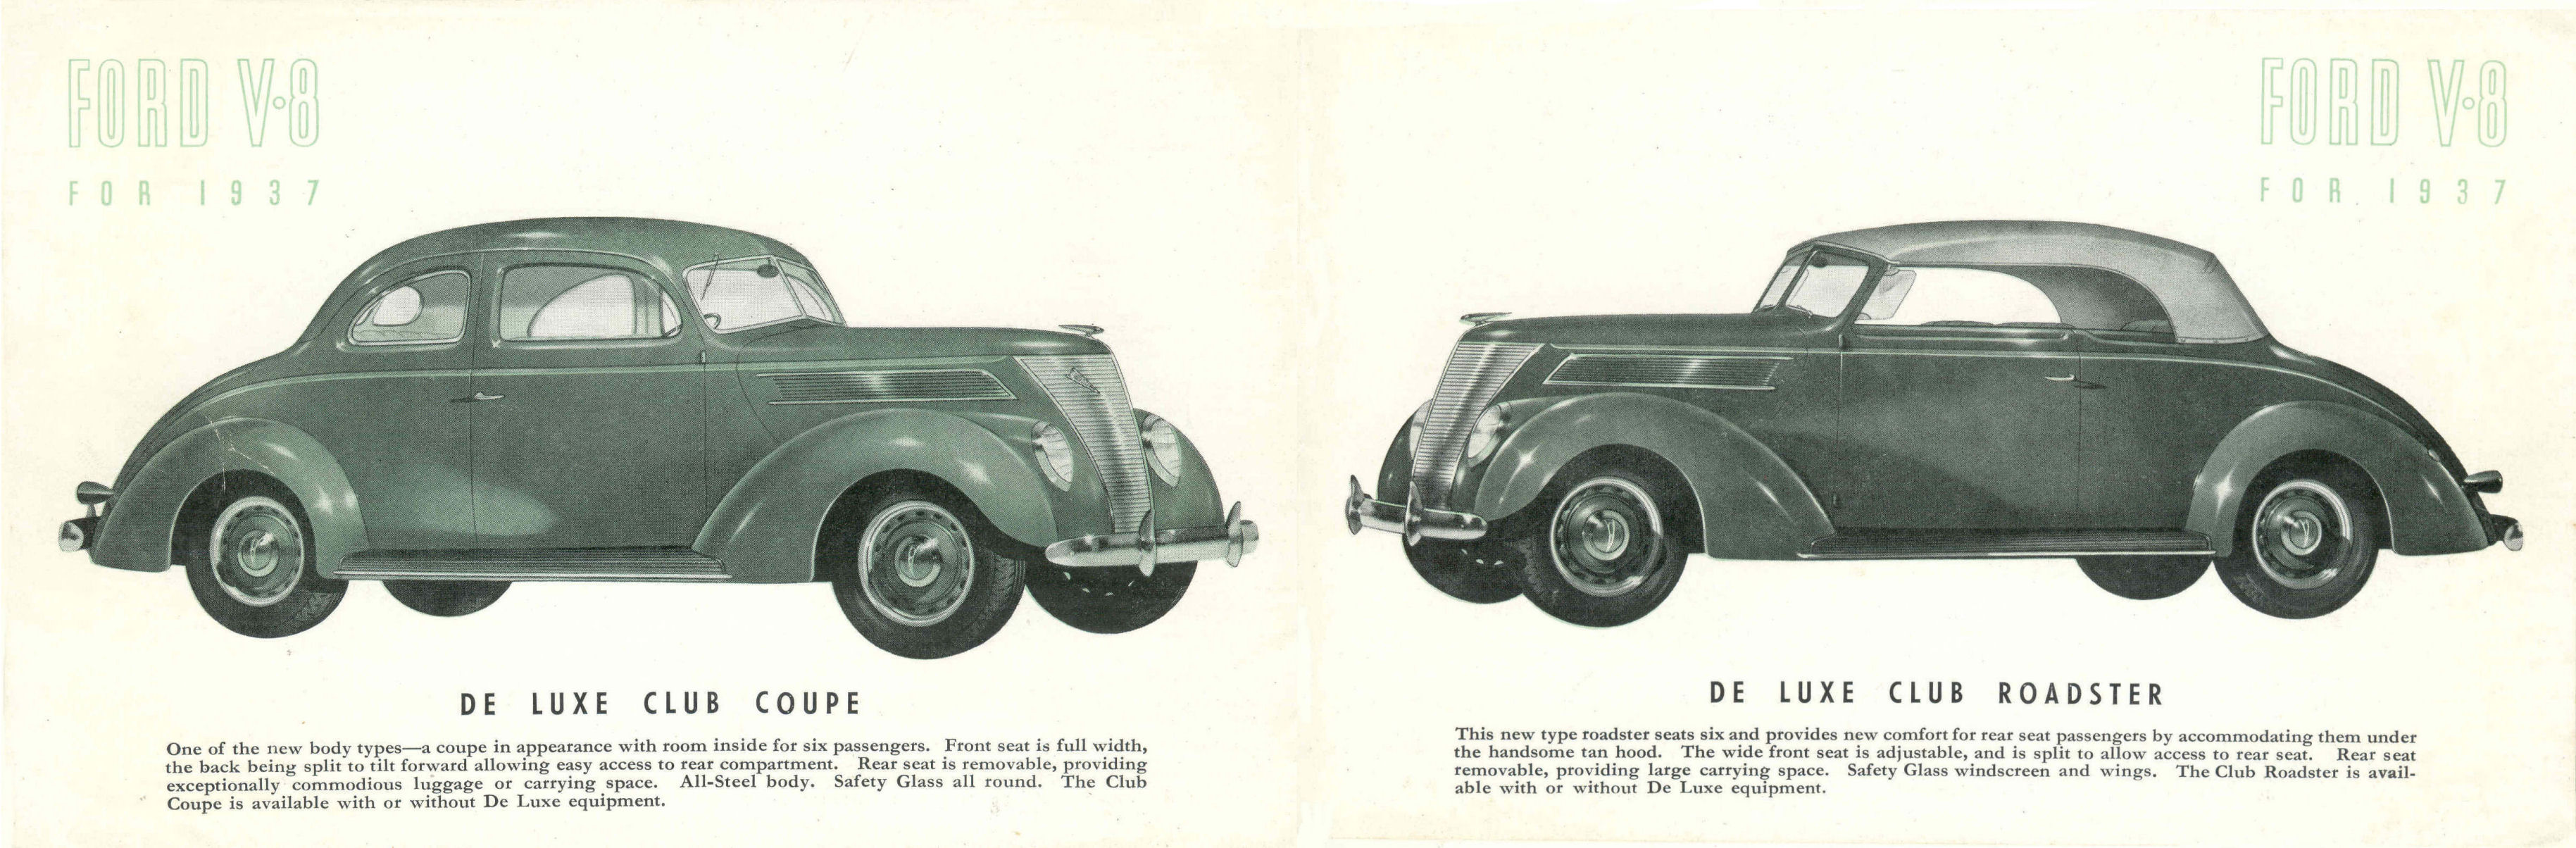 1937_Ford_Small_Aus-04-05